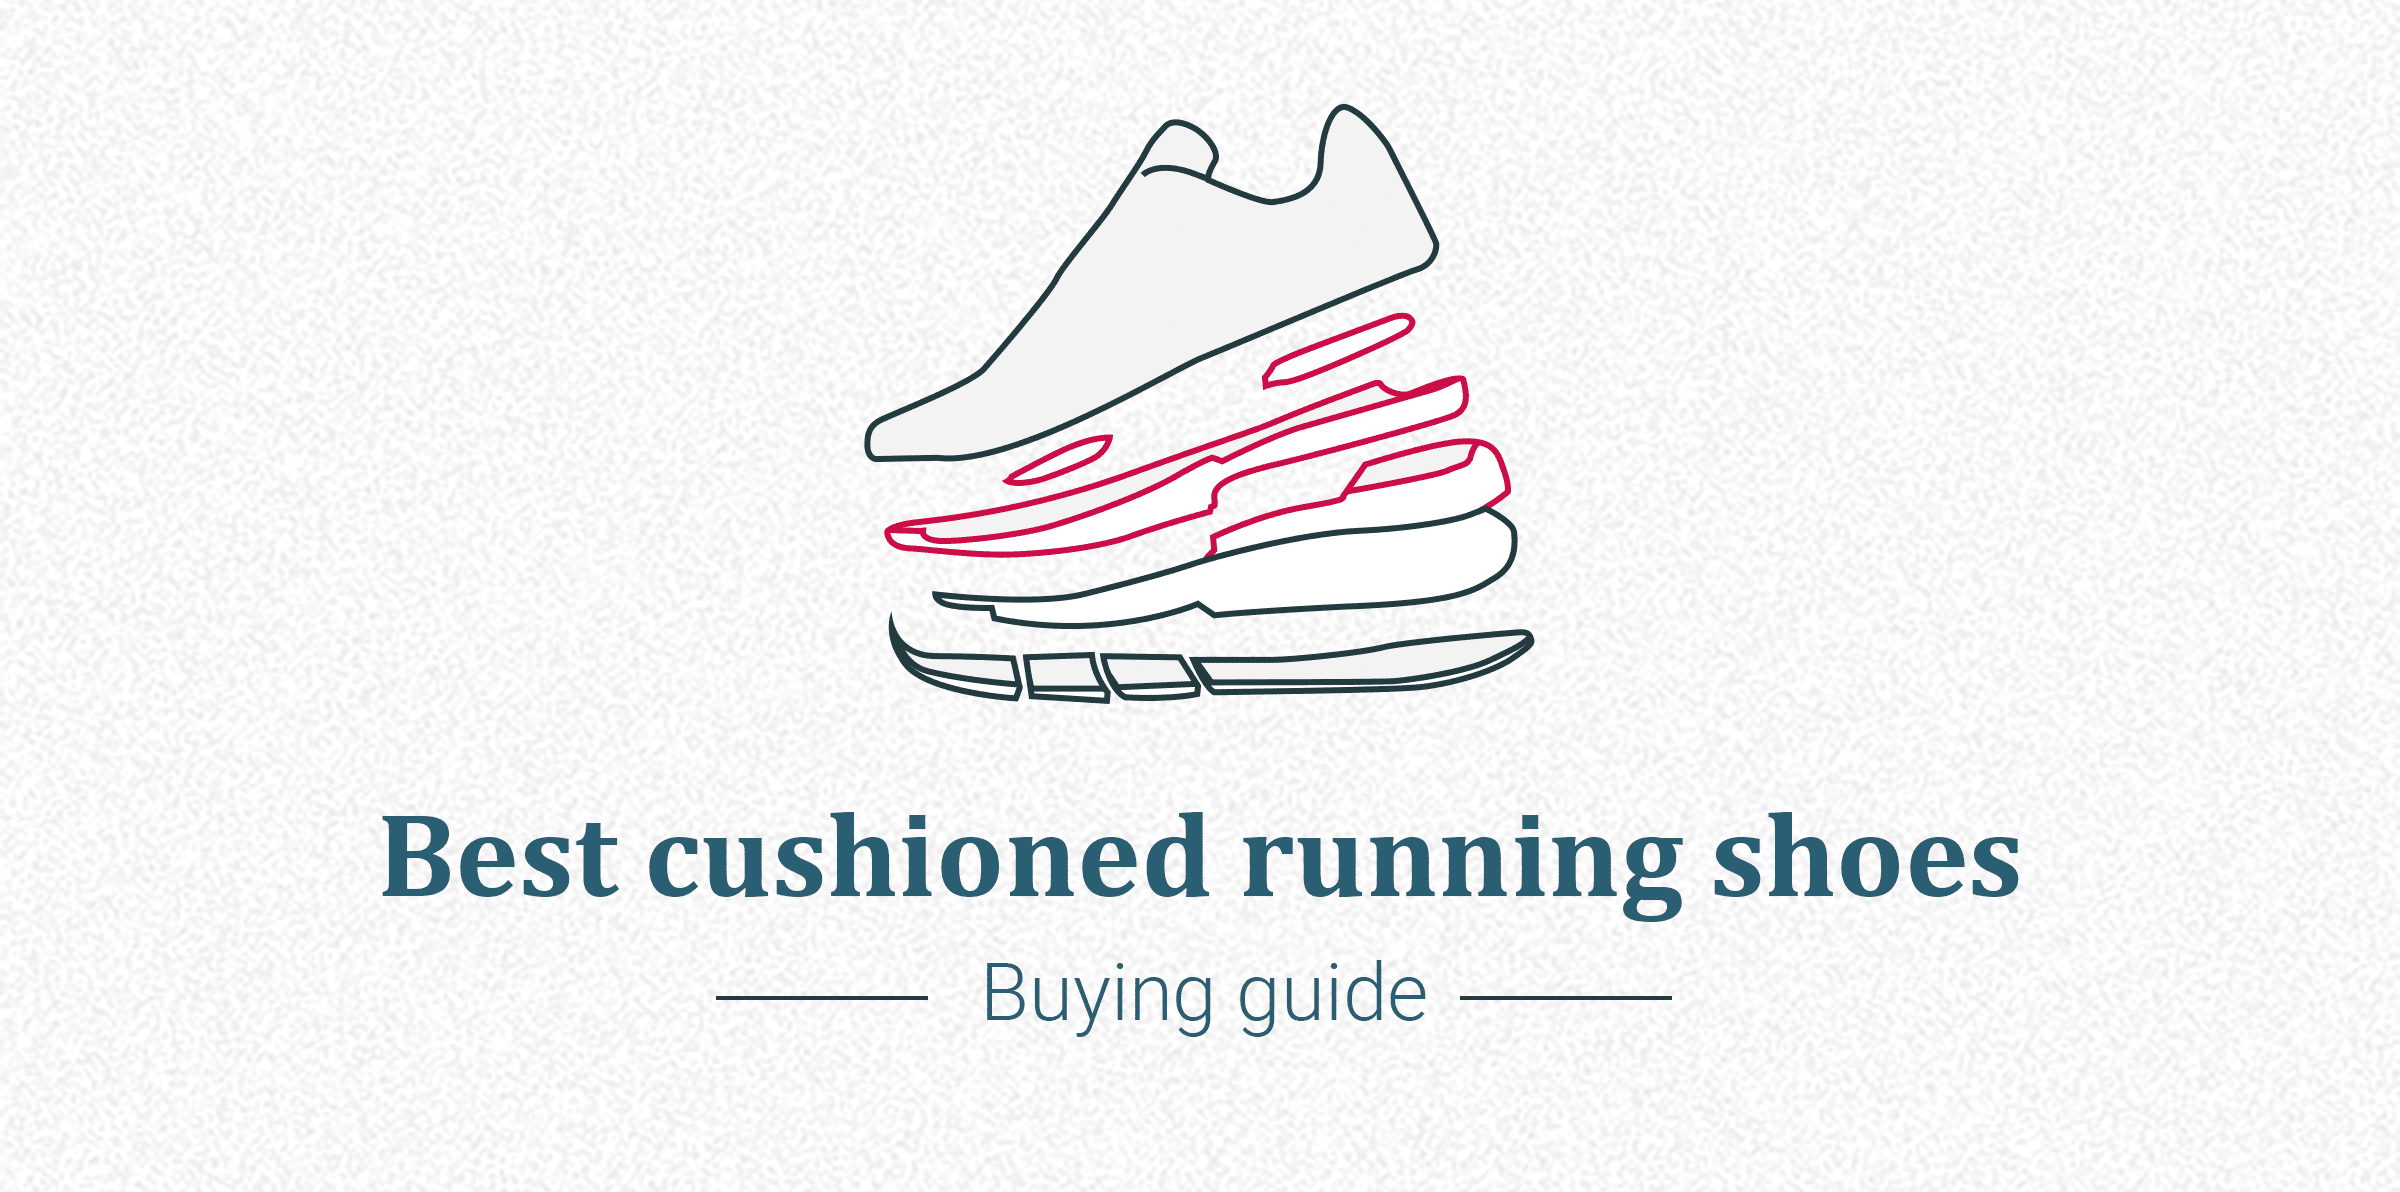 best cushion shoes for running